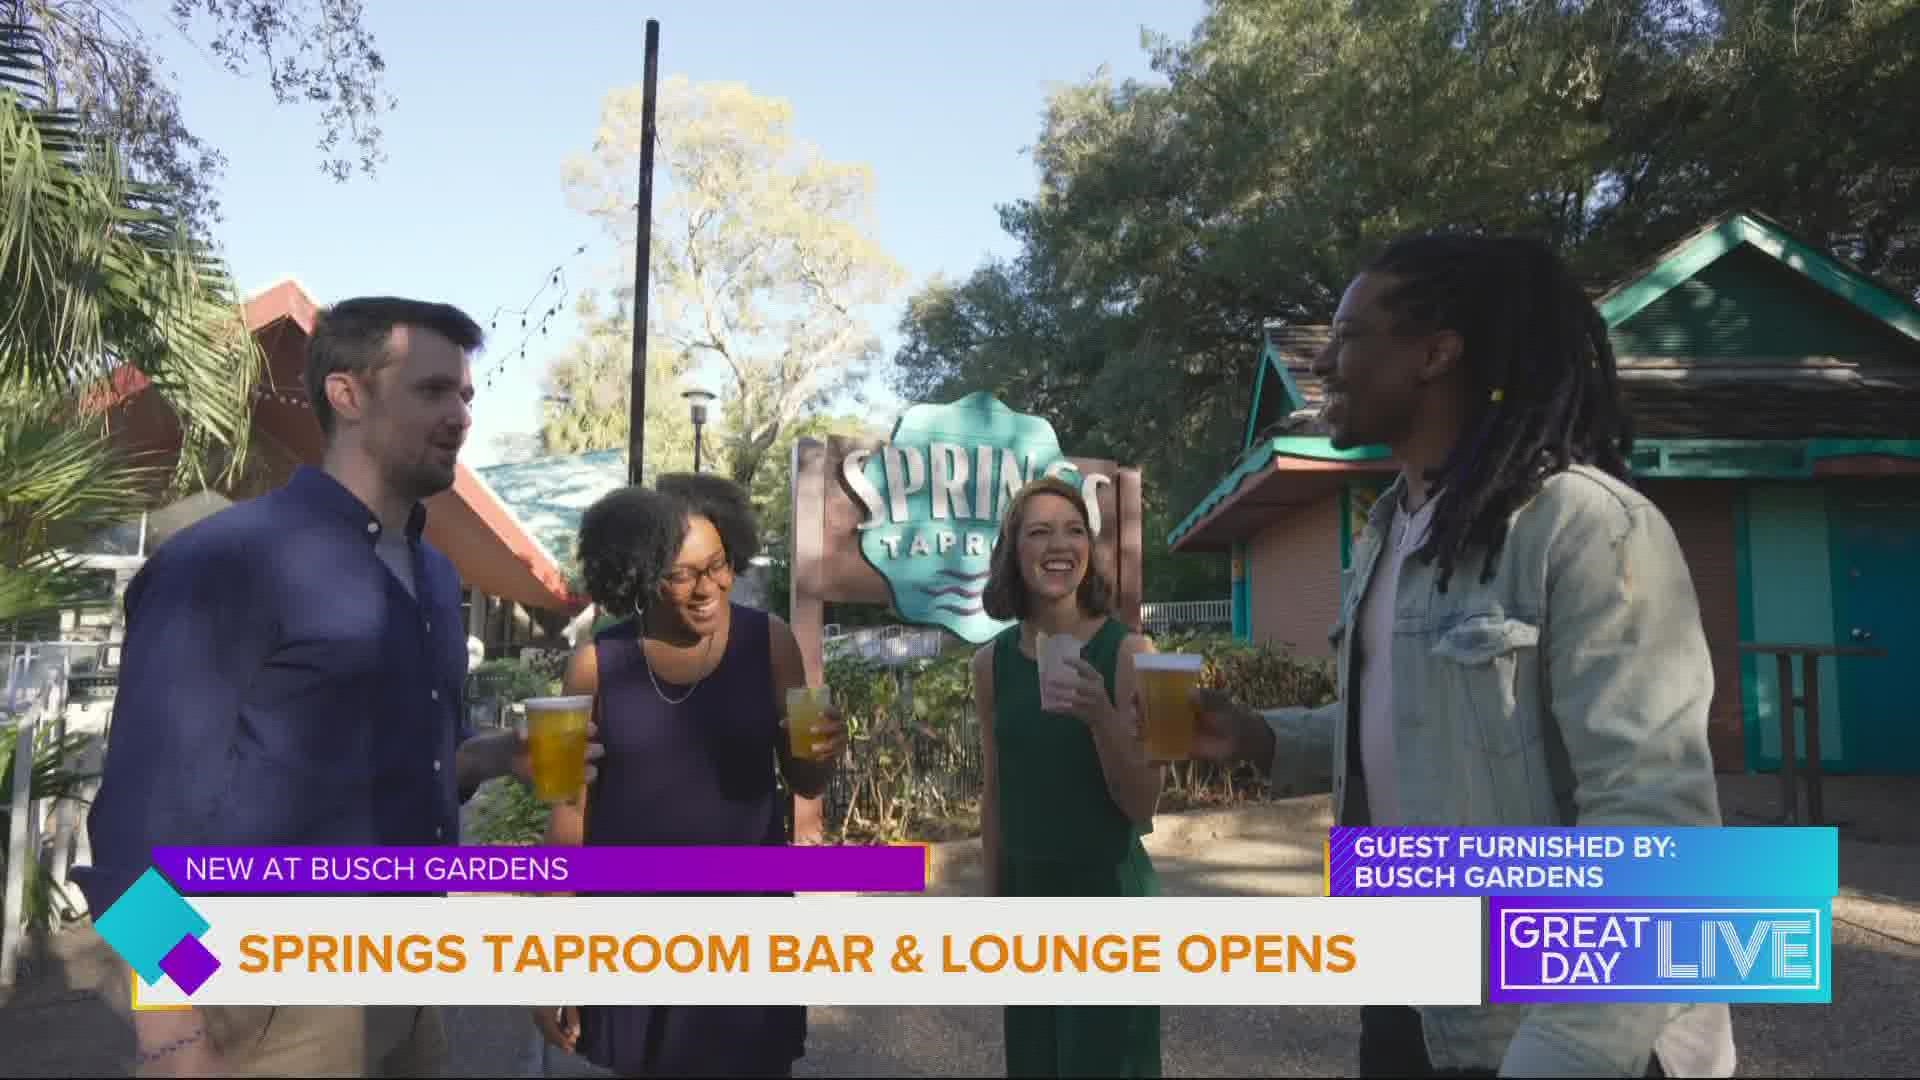 New at Busch Gardens:  Springs Taproom